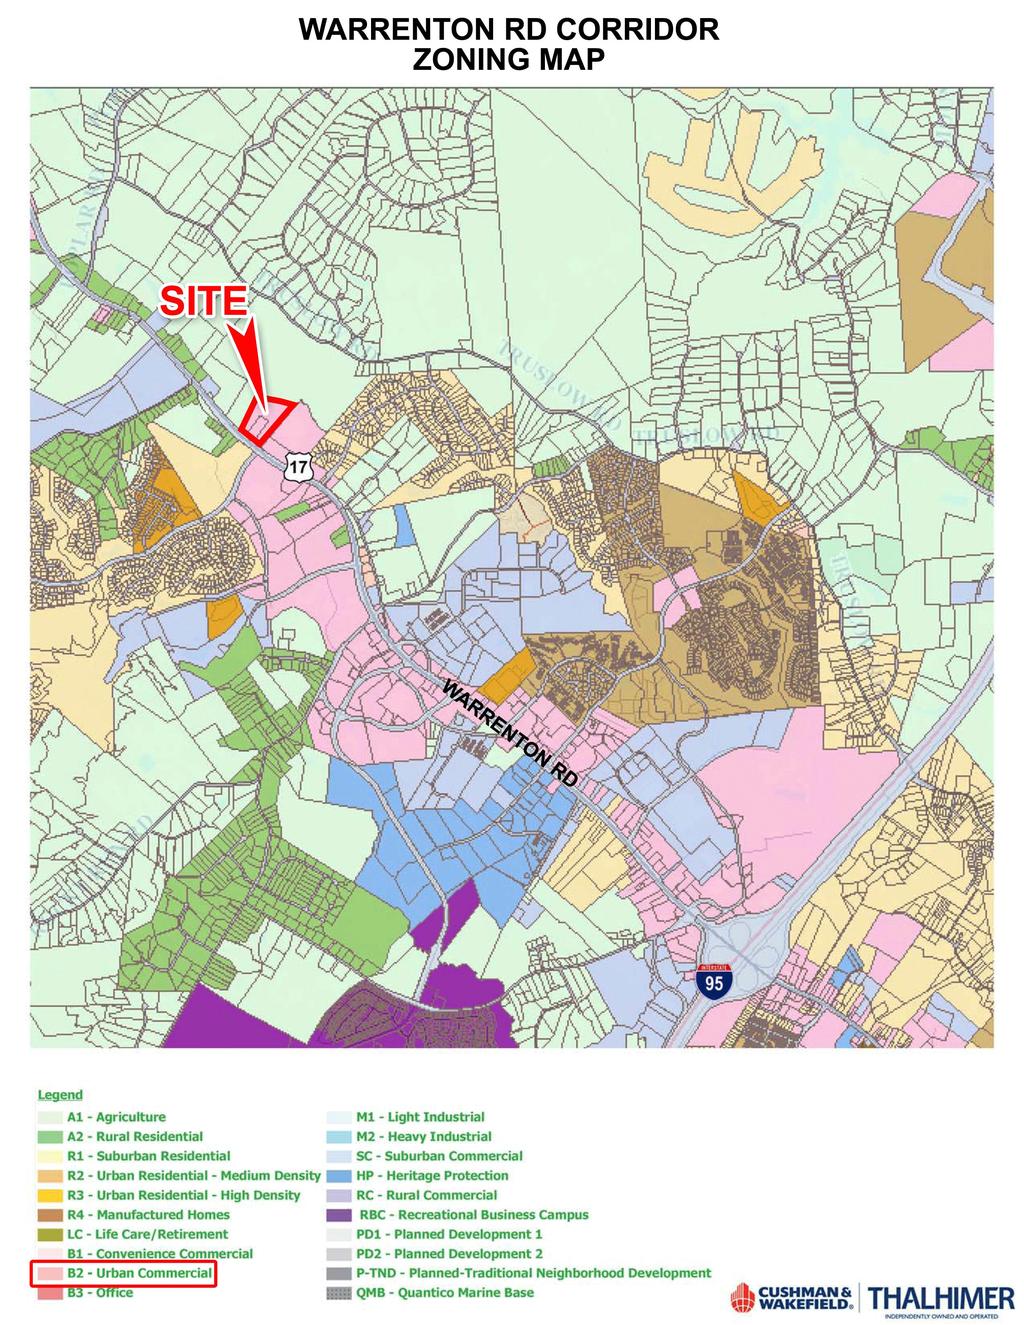 STAFFORD COUNTY ZONING MAPS